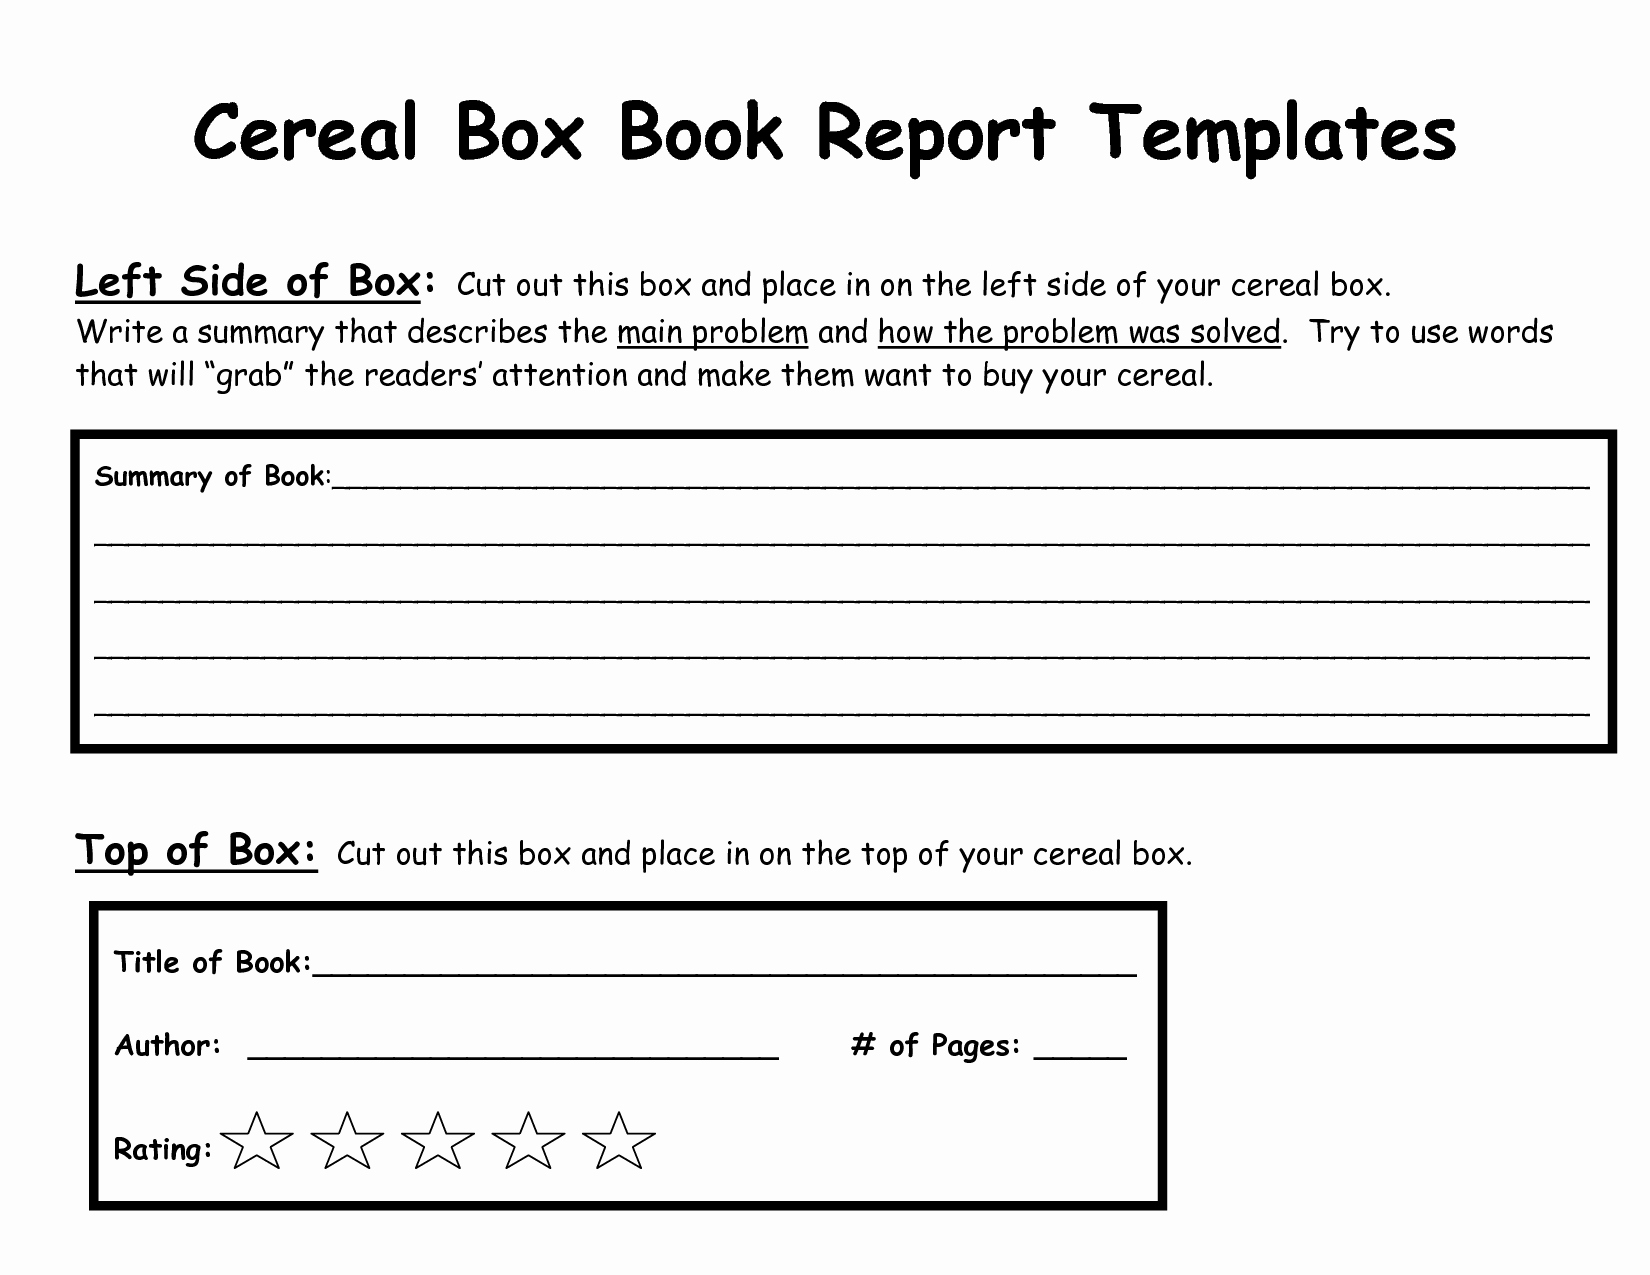 Free Book Report Templates Luxury A Good Idea to Start to Show Students How to Write A